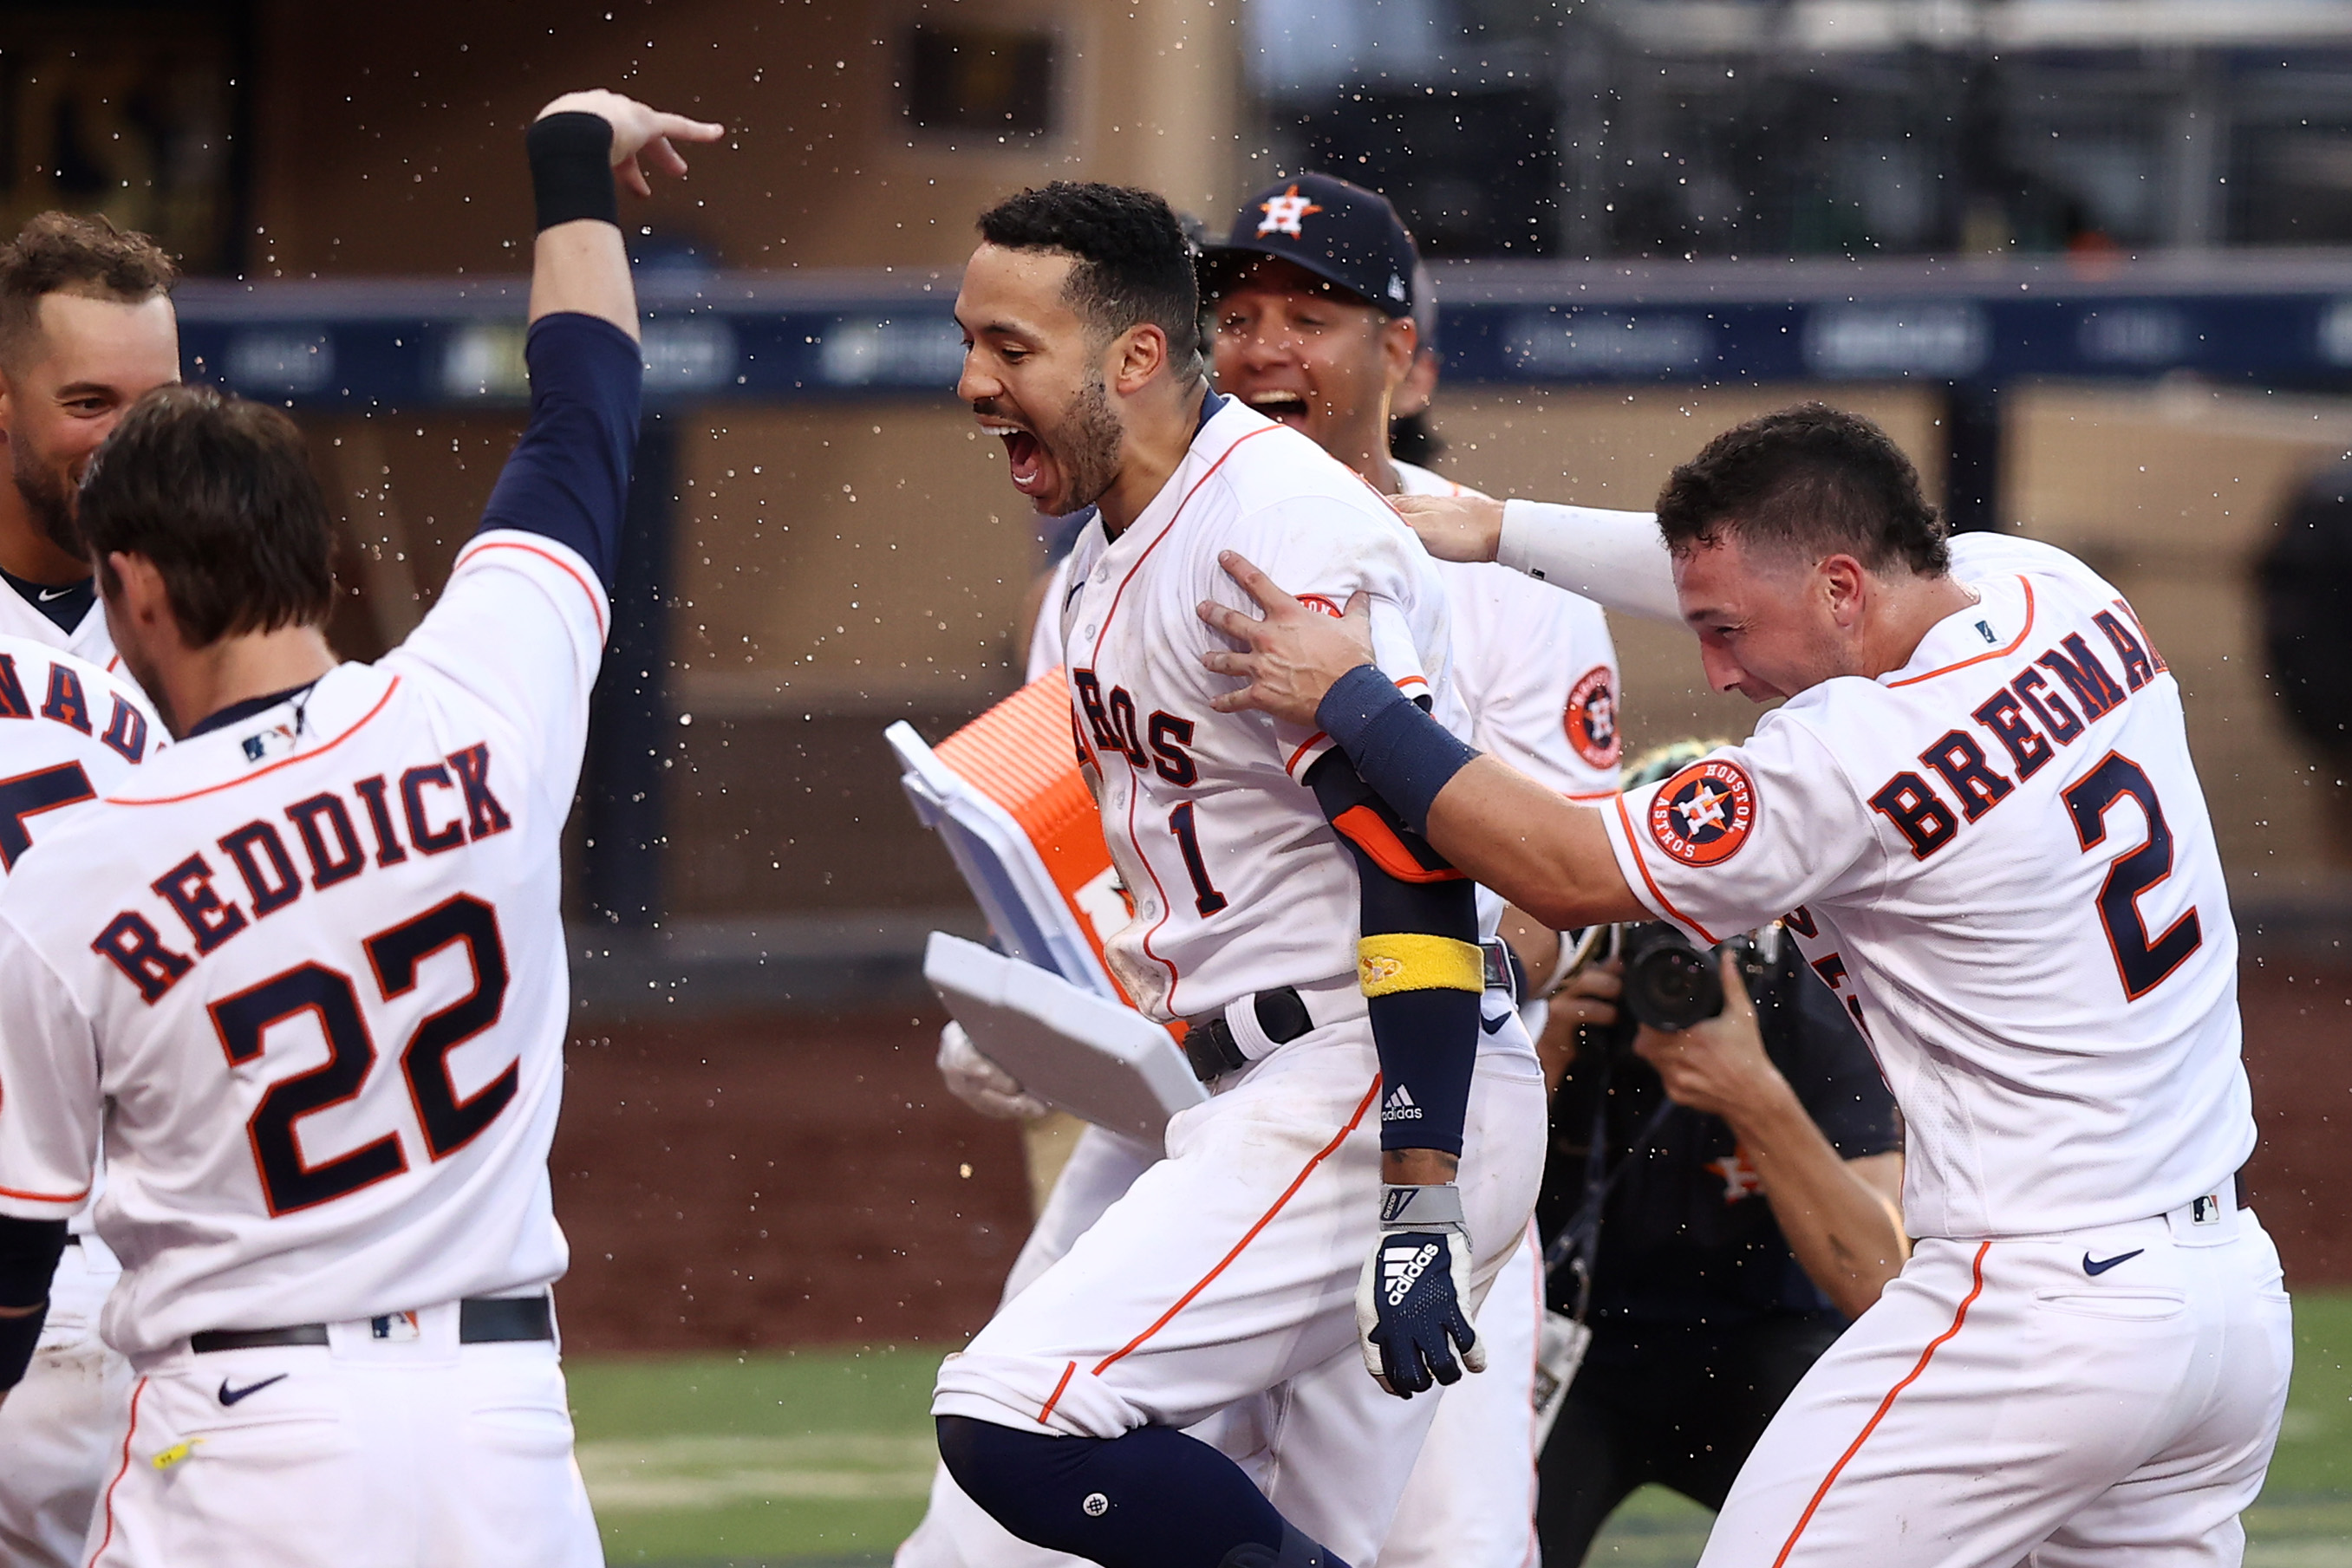 Carlos Correa's Walk-Off Home Run Helps the Astros Even Up the